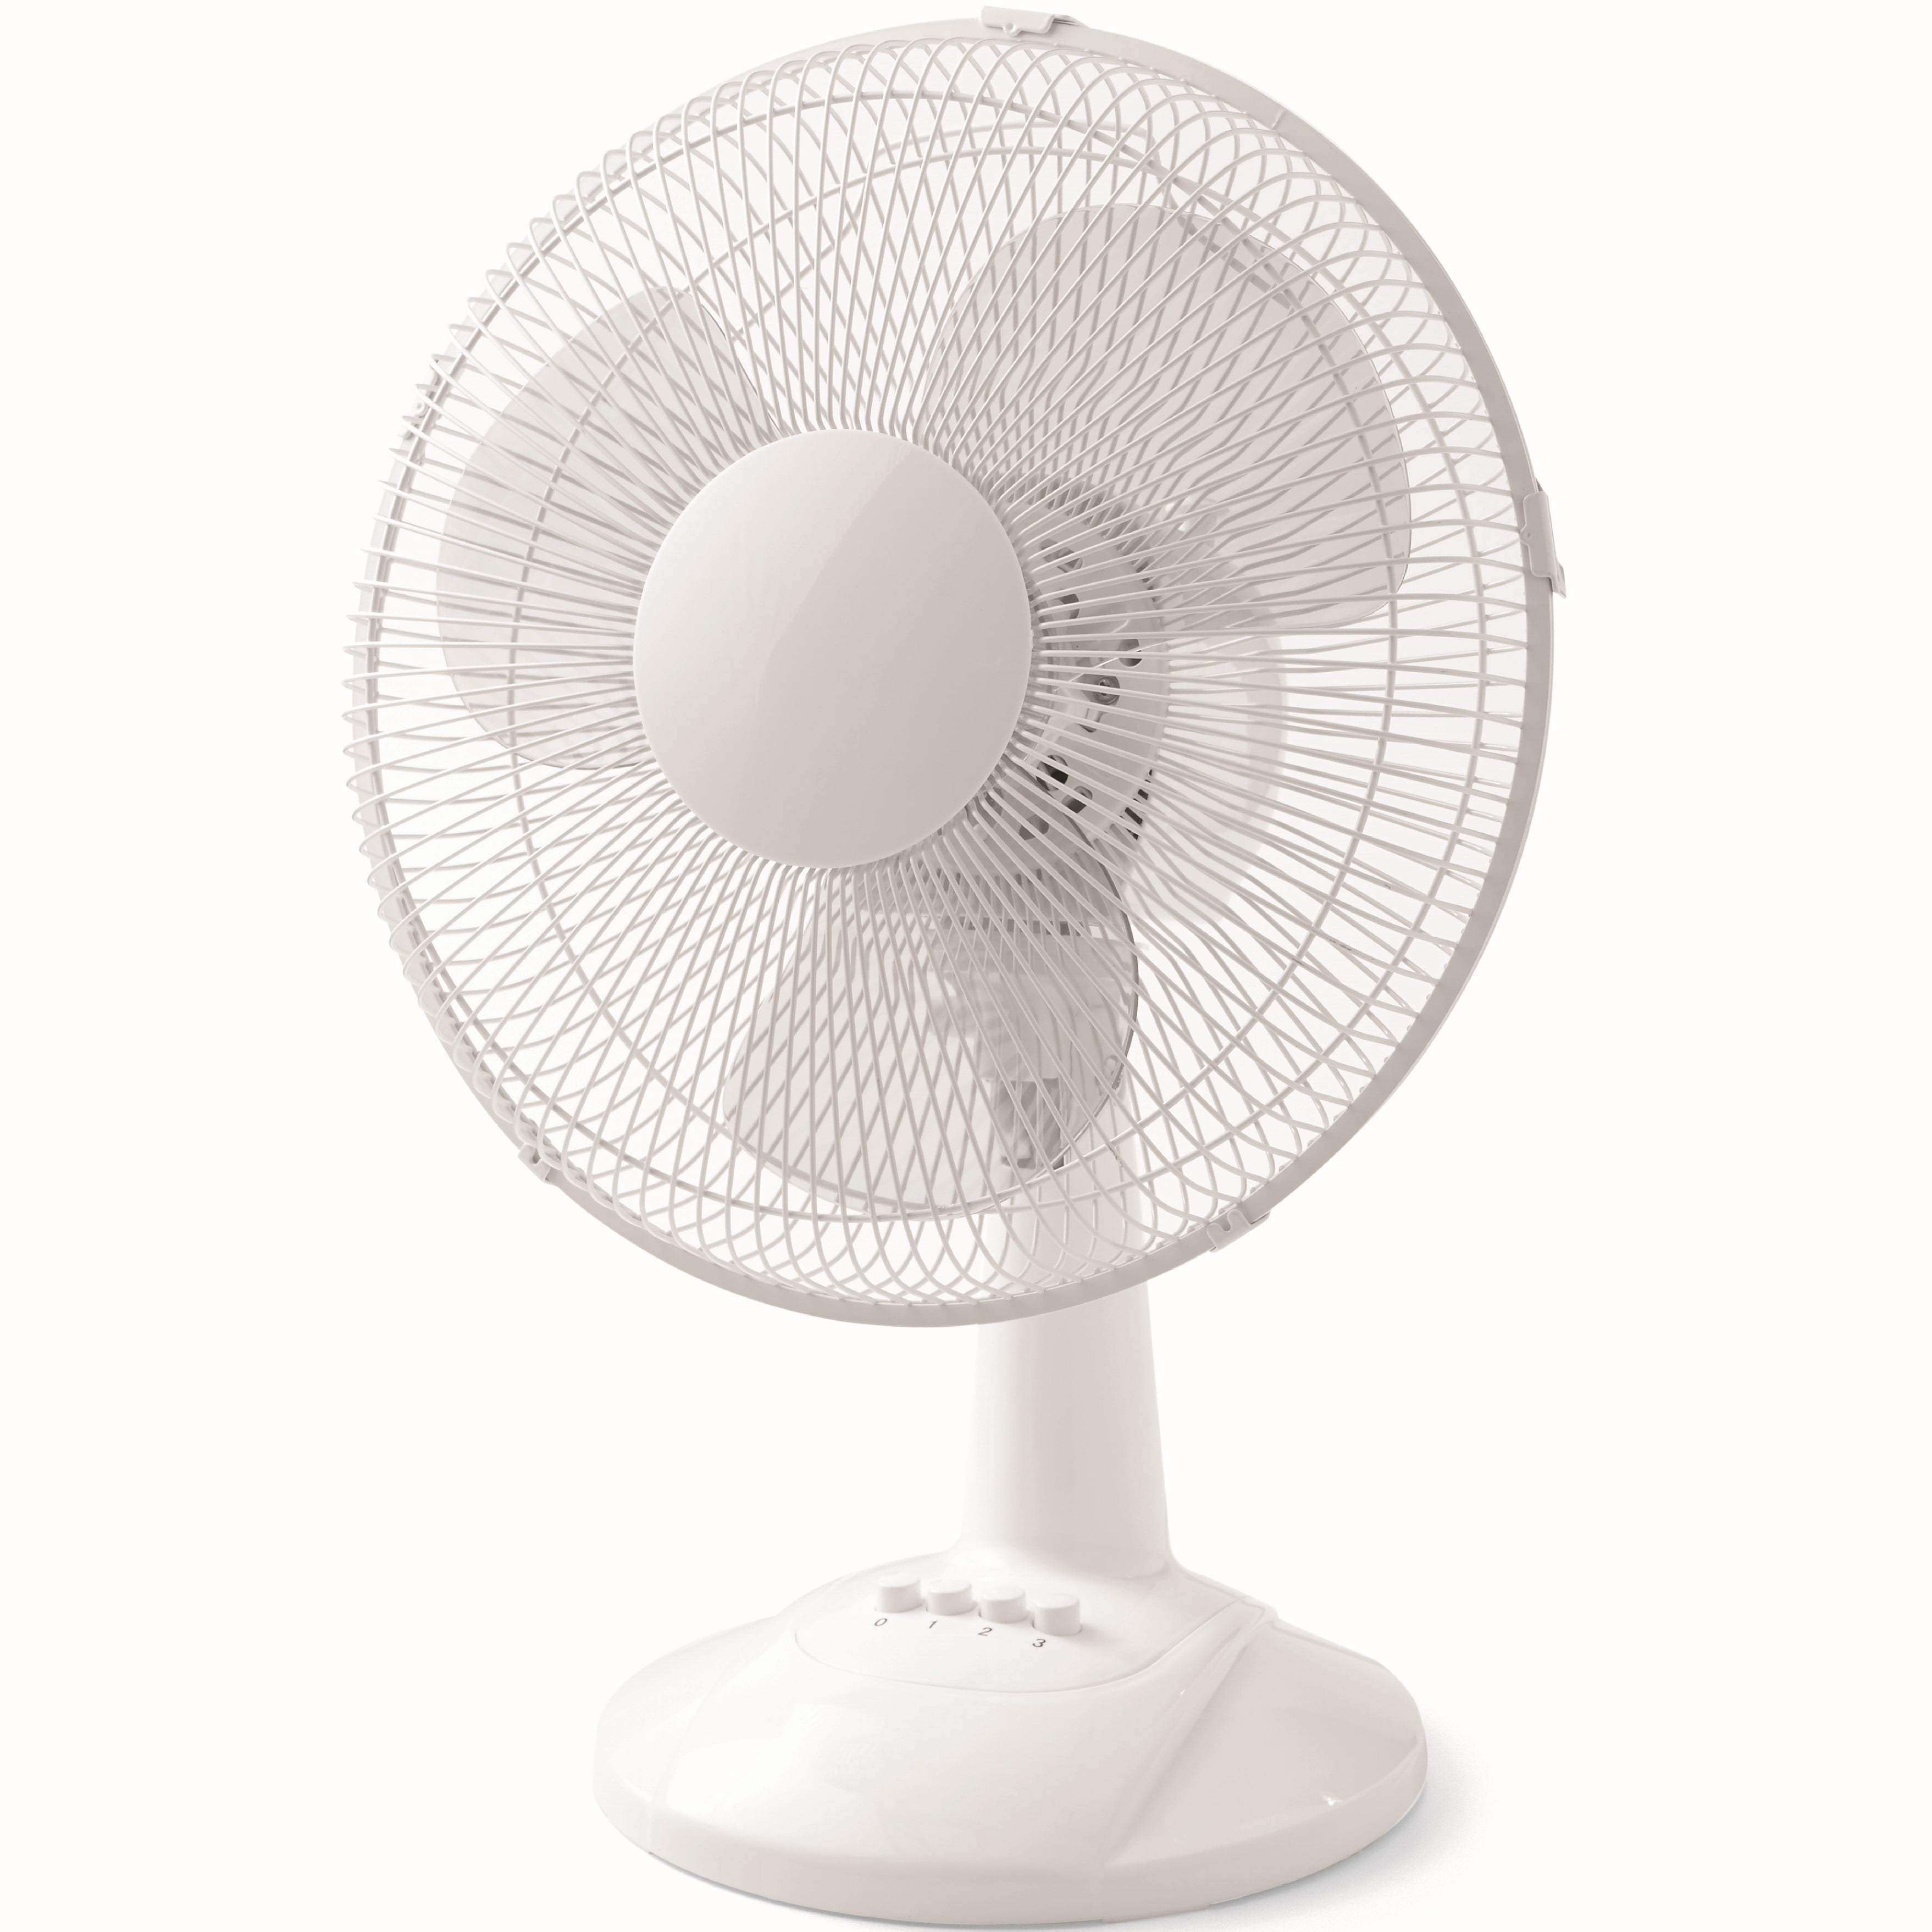 Mainstays 12" 3-Speed Oscillating Table Fan, FT30-8MBW, White